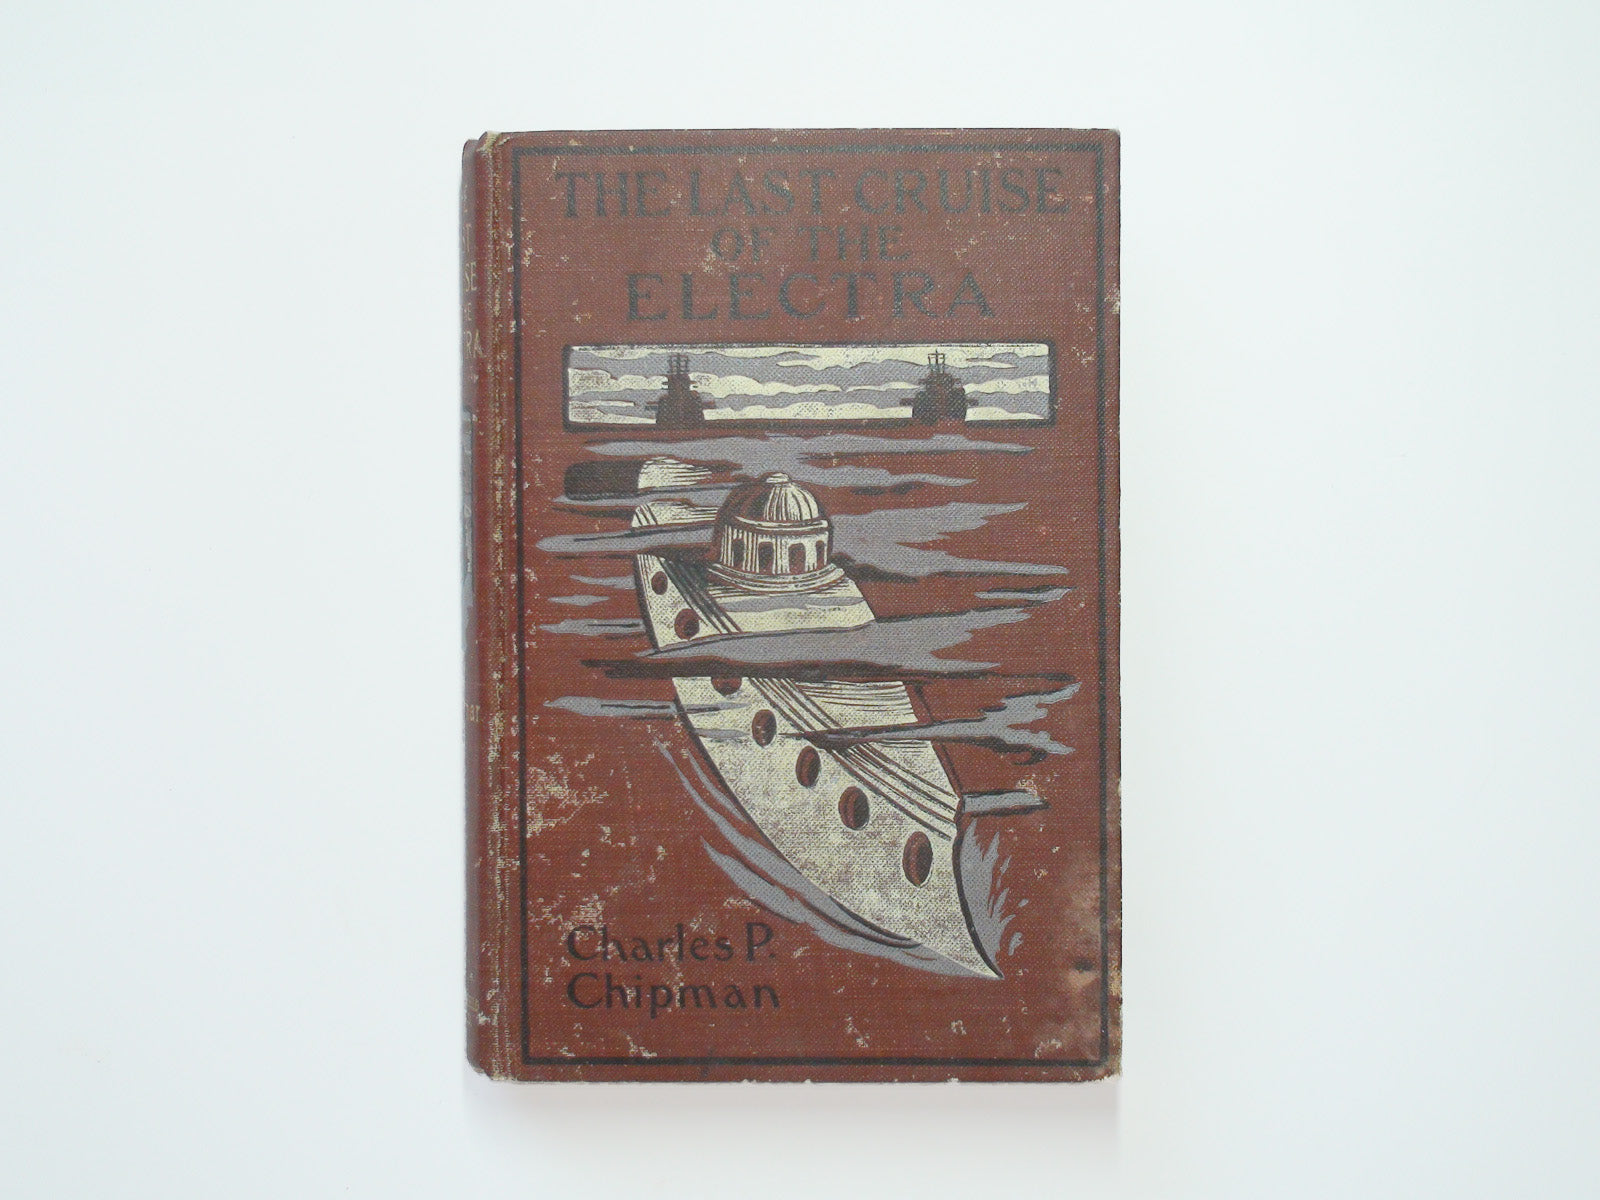 The Last Cruise of the Electra, by Charles Phillips Chipman, Illustrated, 1st Ed, 1902